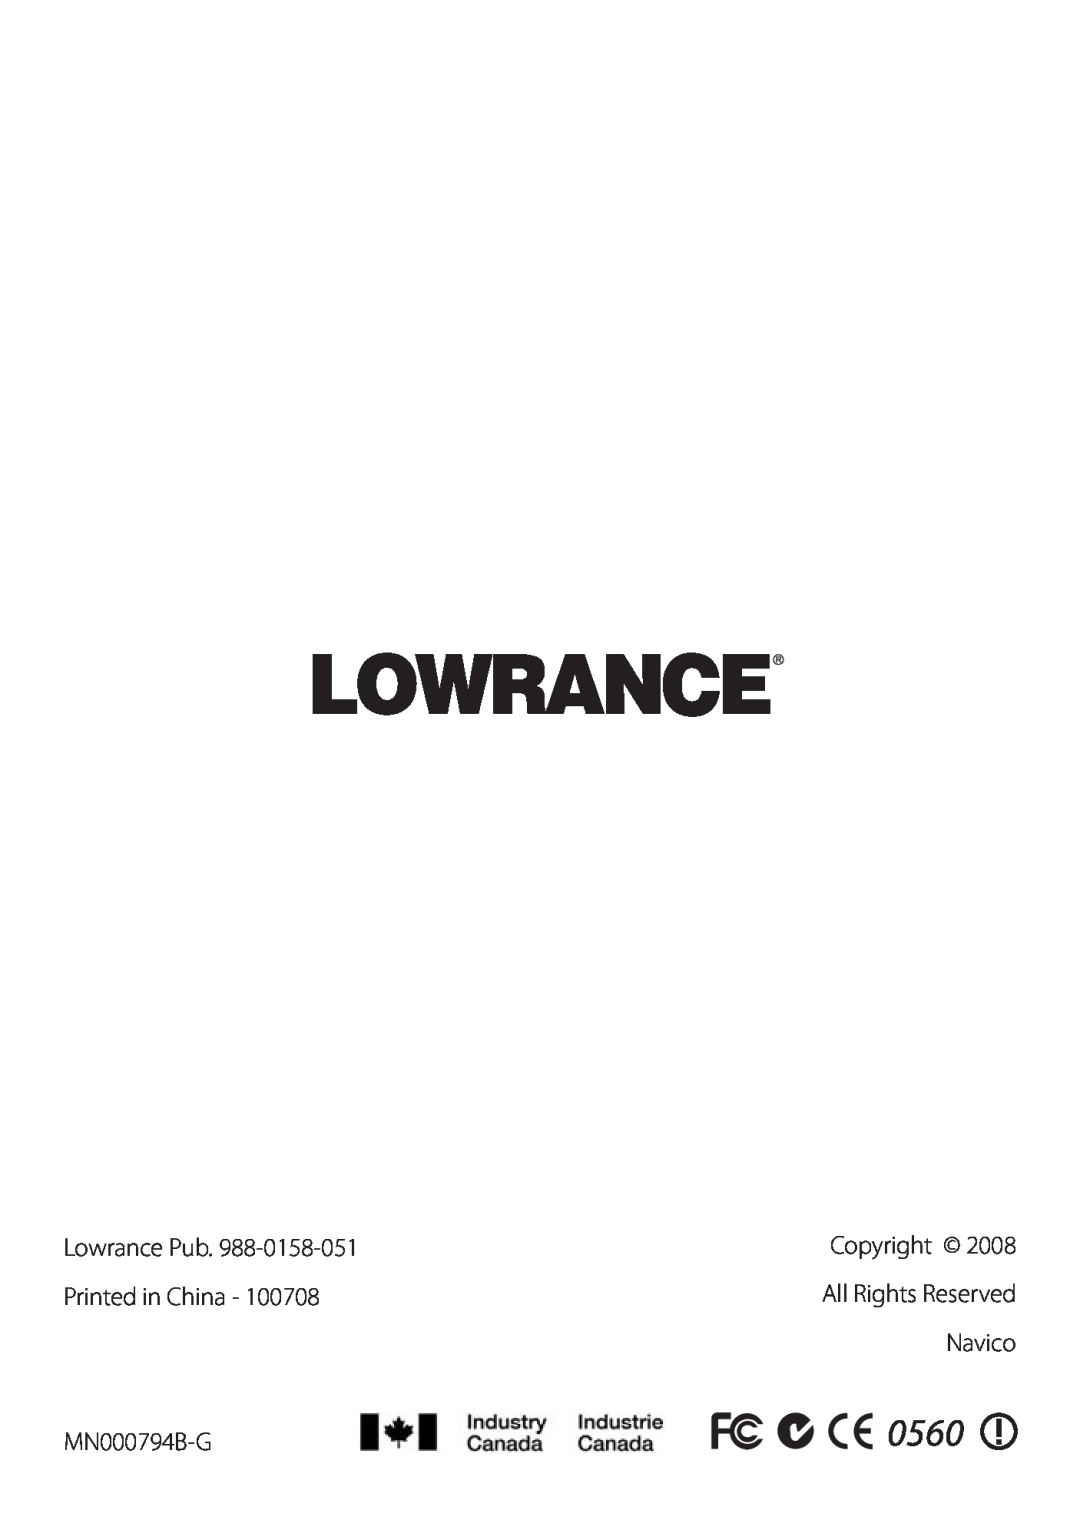 Lowrance electronic LVR-250 manual 0560, Lowrance Pub, Printed in China, Navico, MN000794B-G, Copyright 